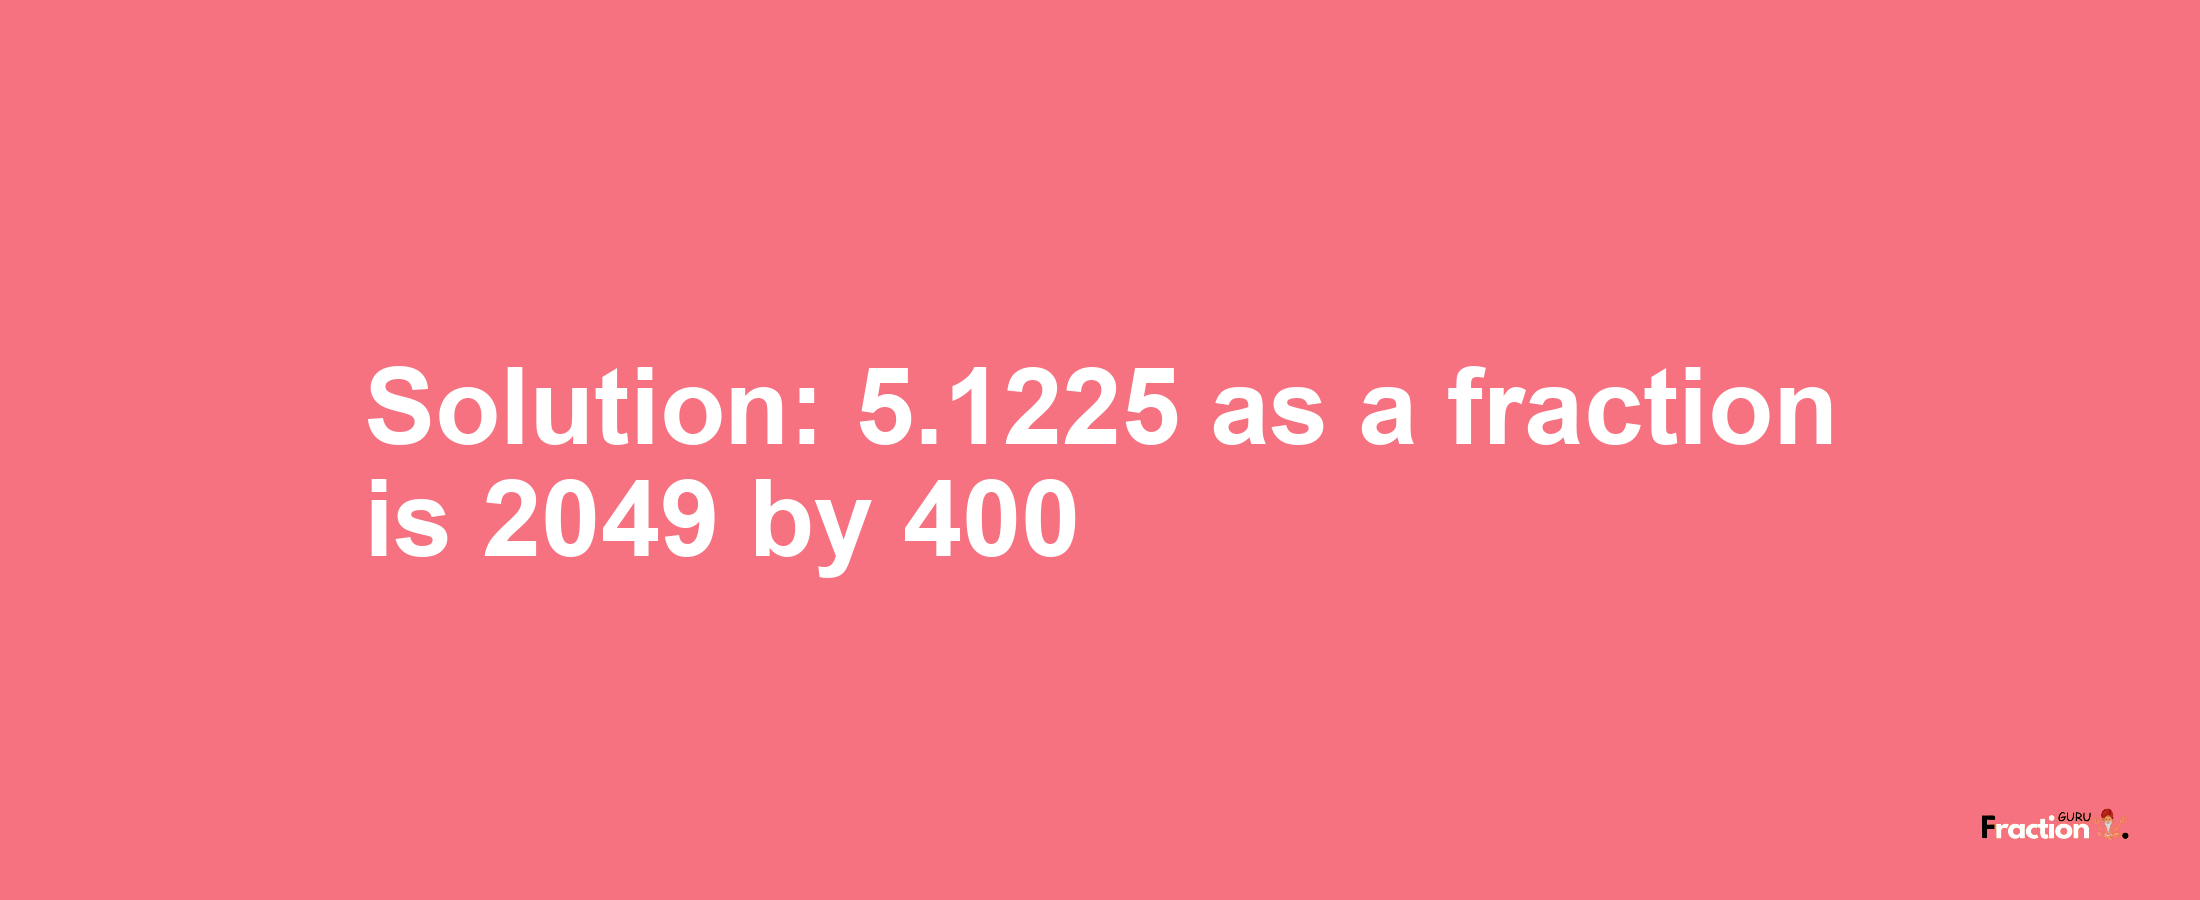 Solution:5.1225 as a fraction is 2049/400